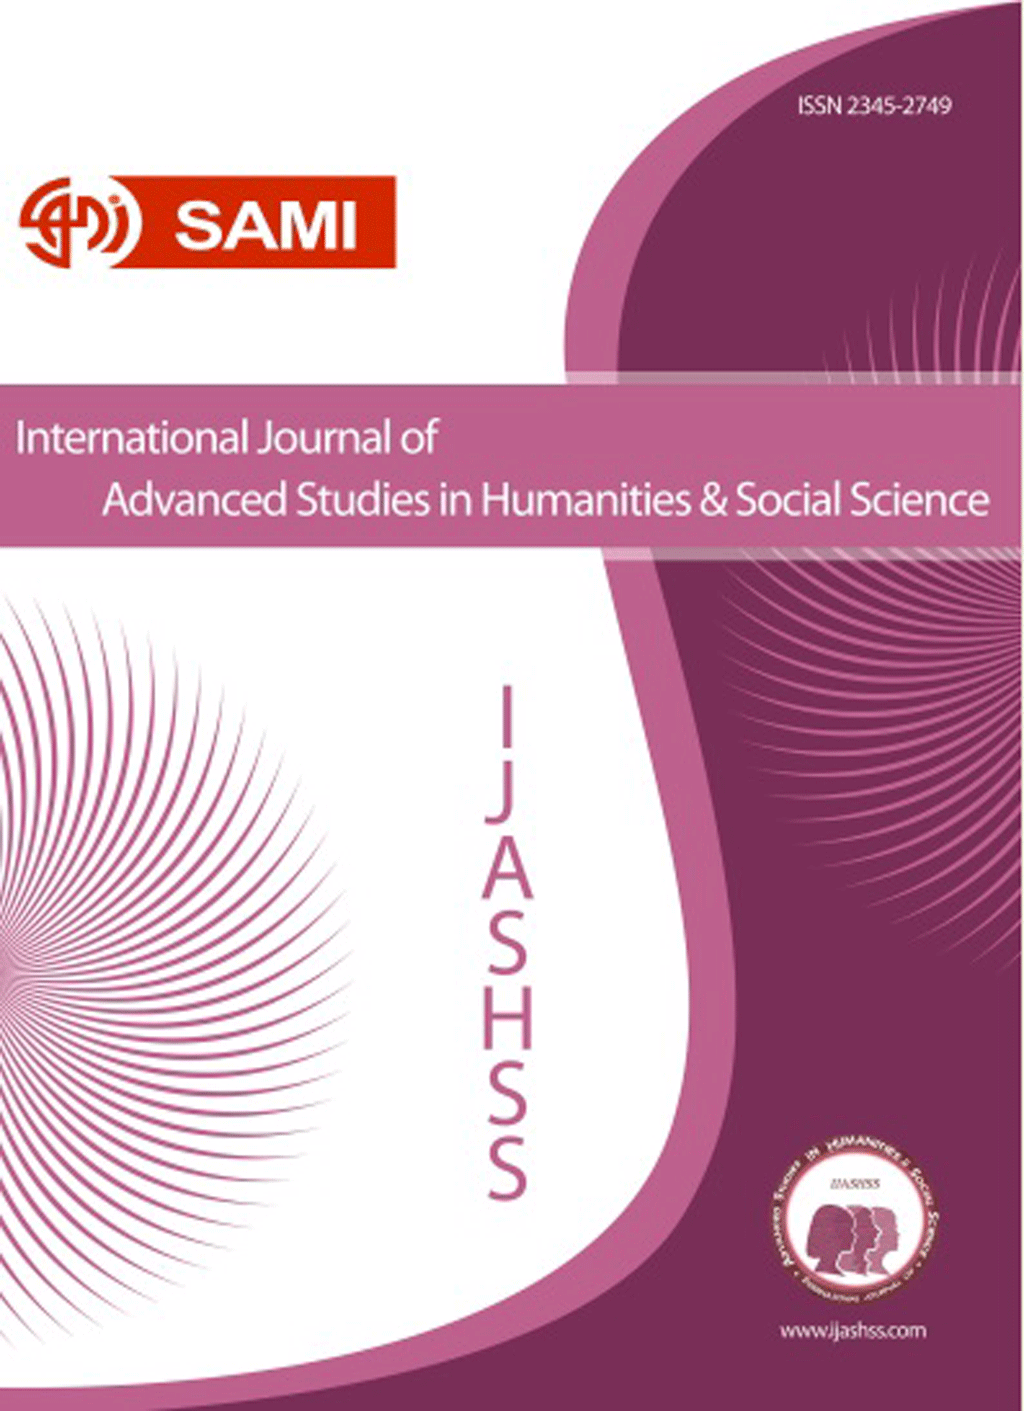 International Journal of Advanced Studies in Humanities and Social Science - October 2012, Volume 1 - Issue 4